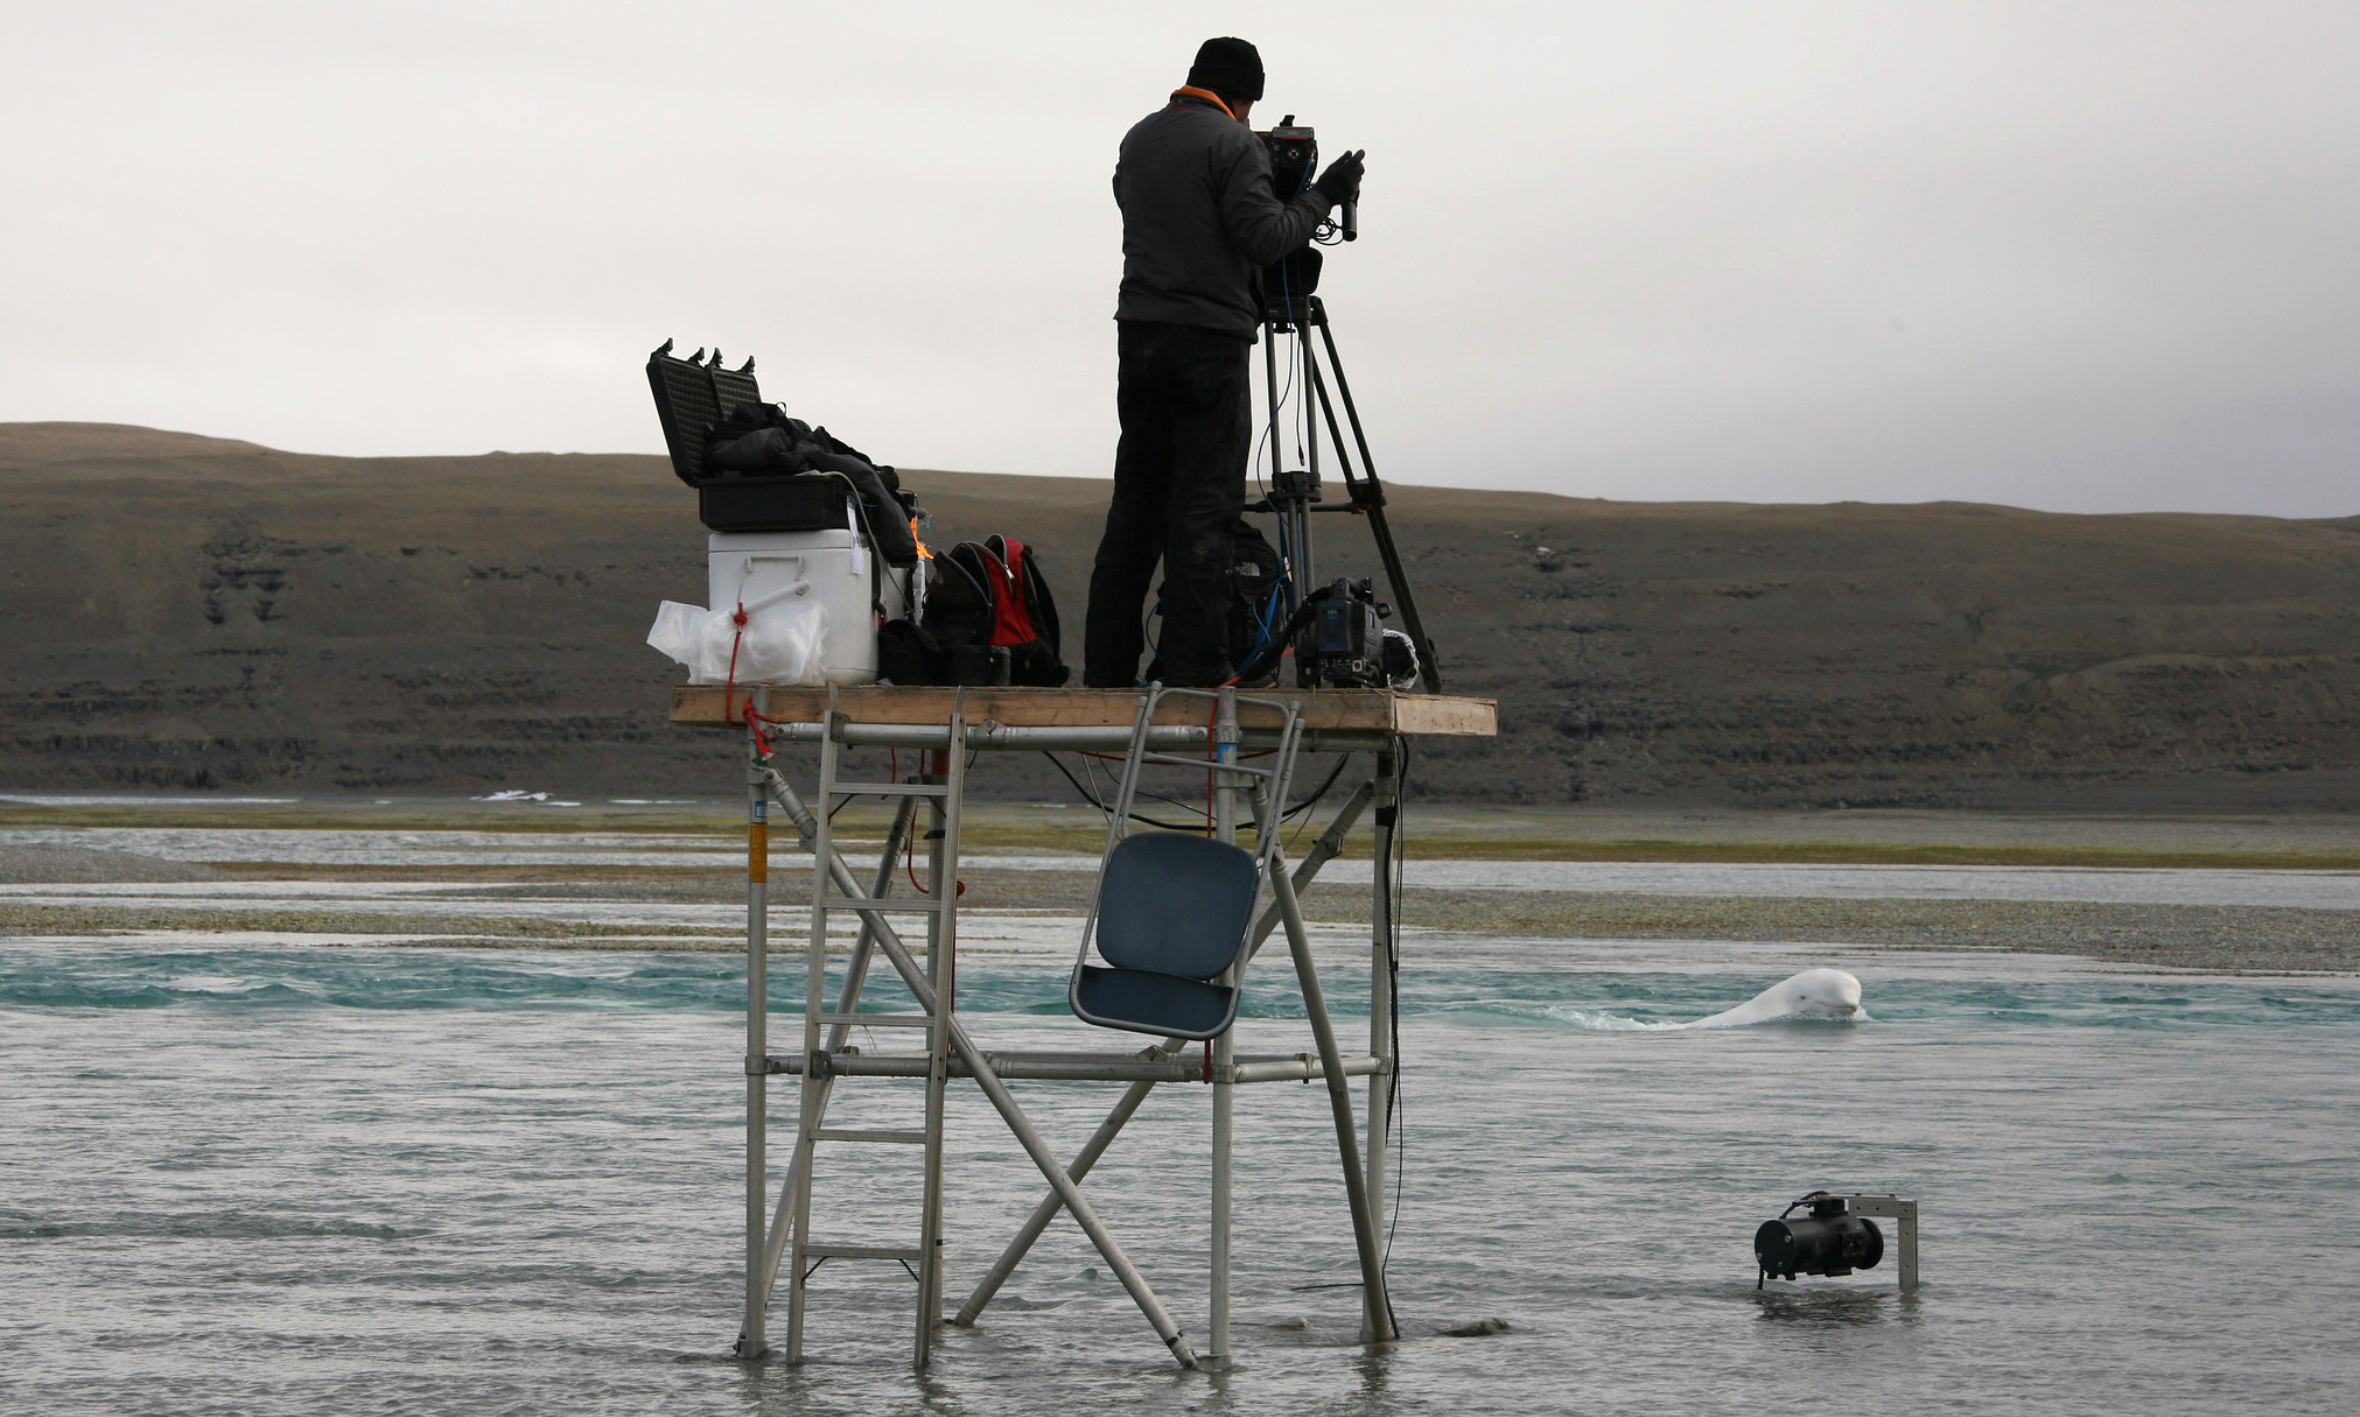 Filming & Photographing in the Canadian Arctic